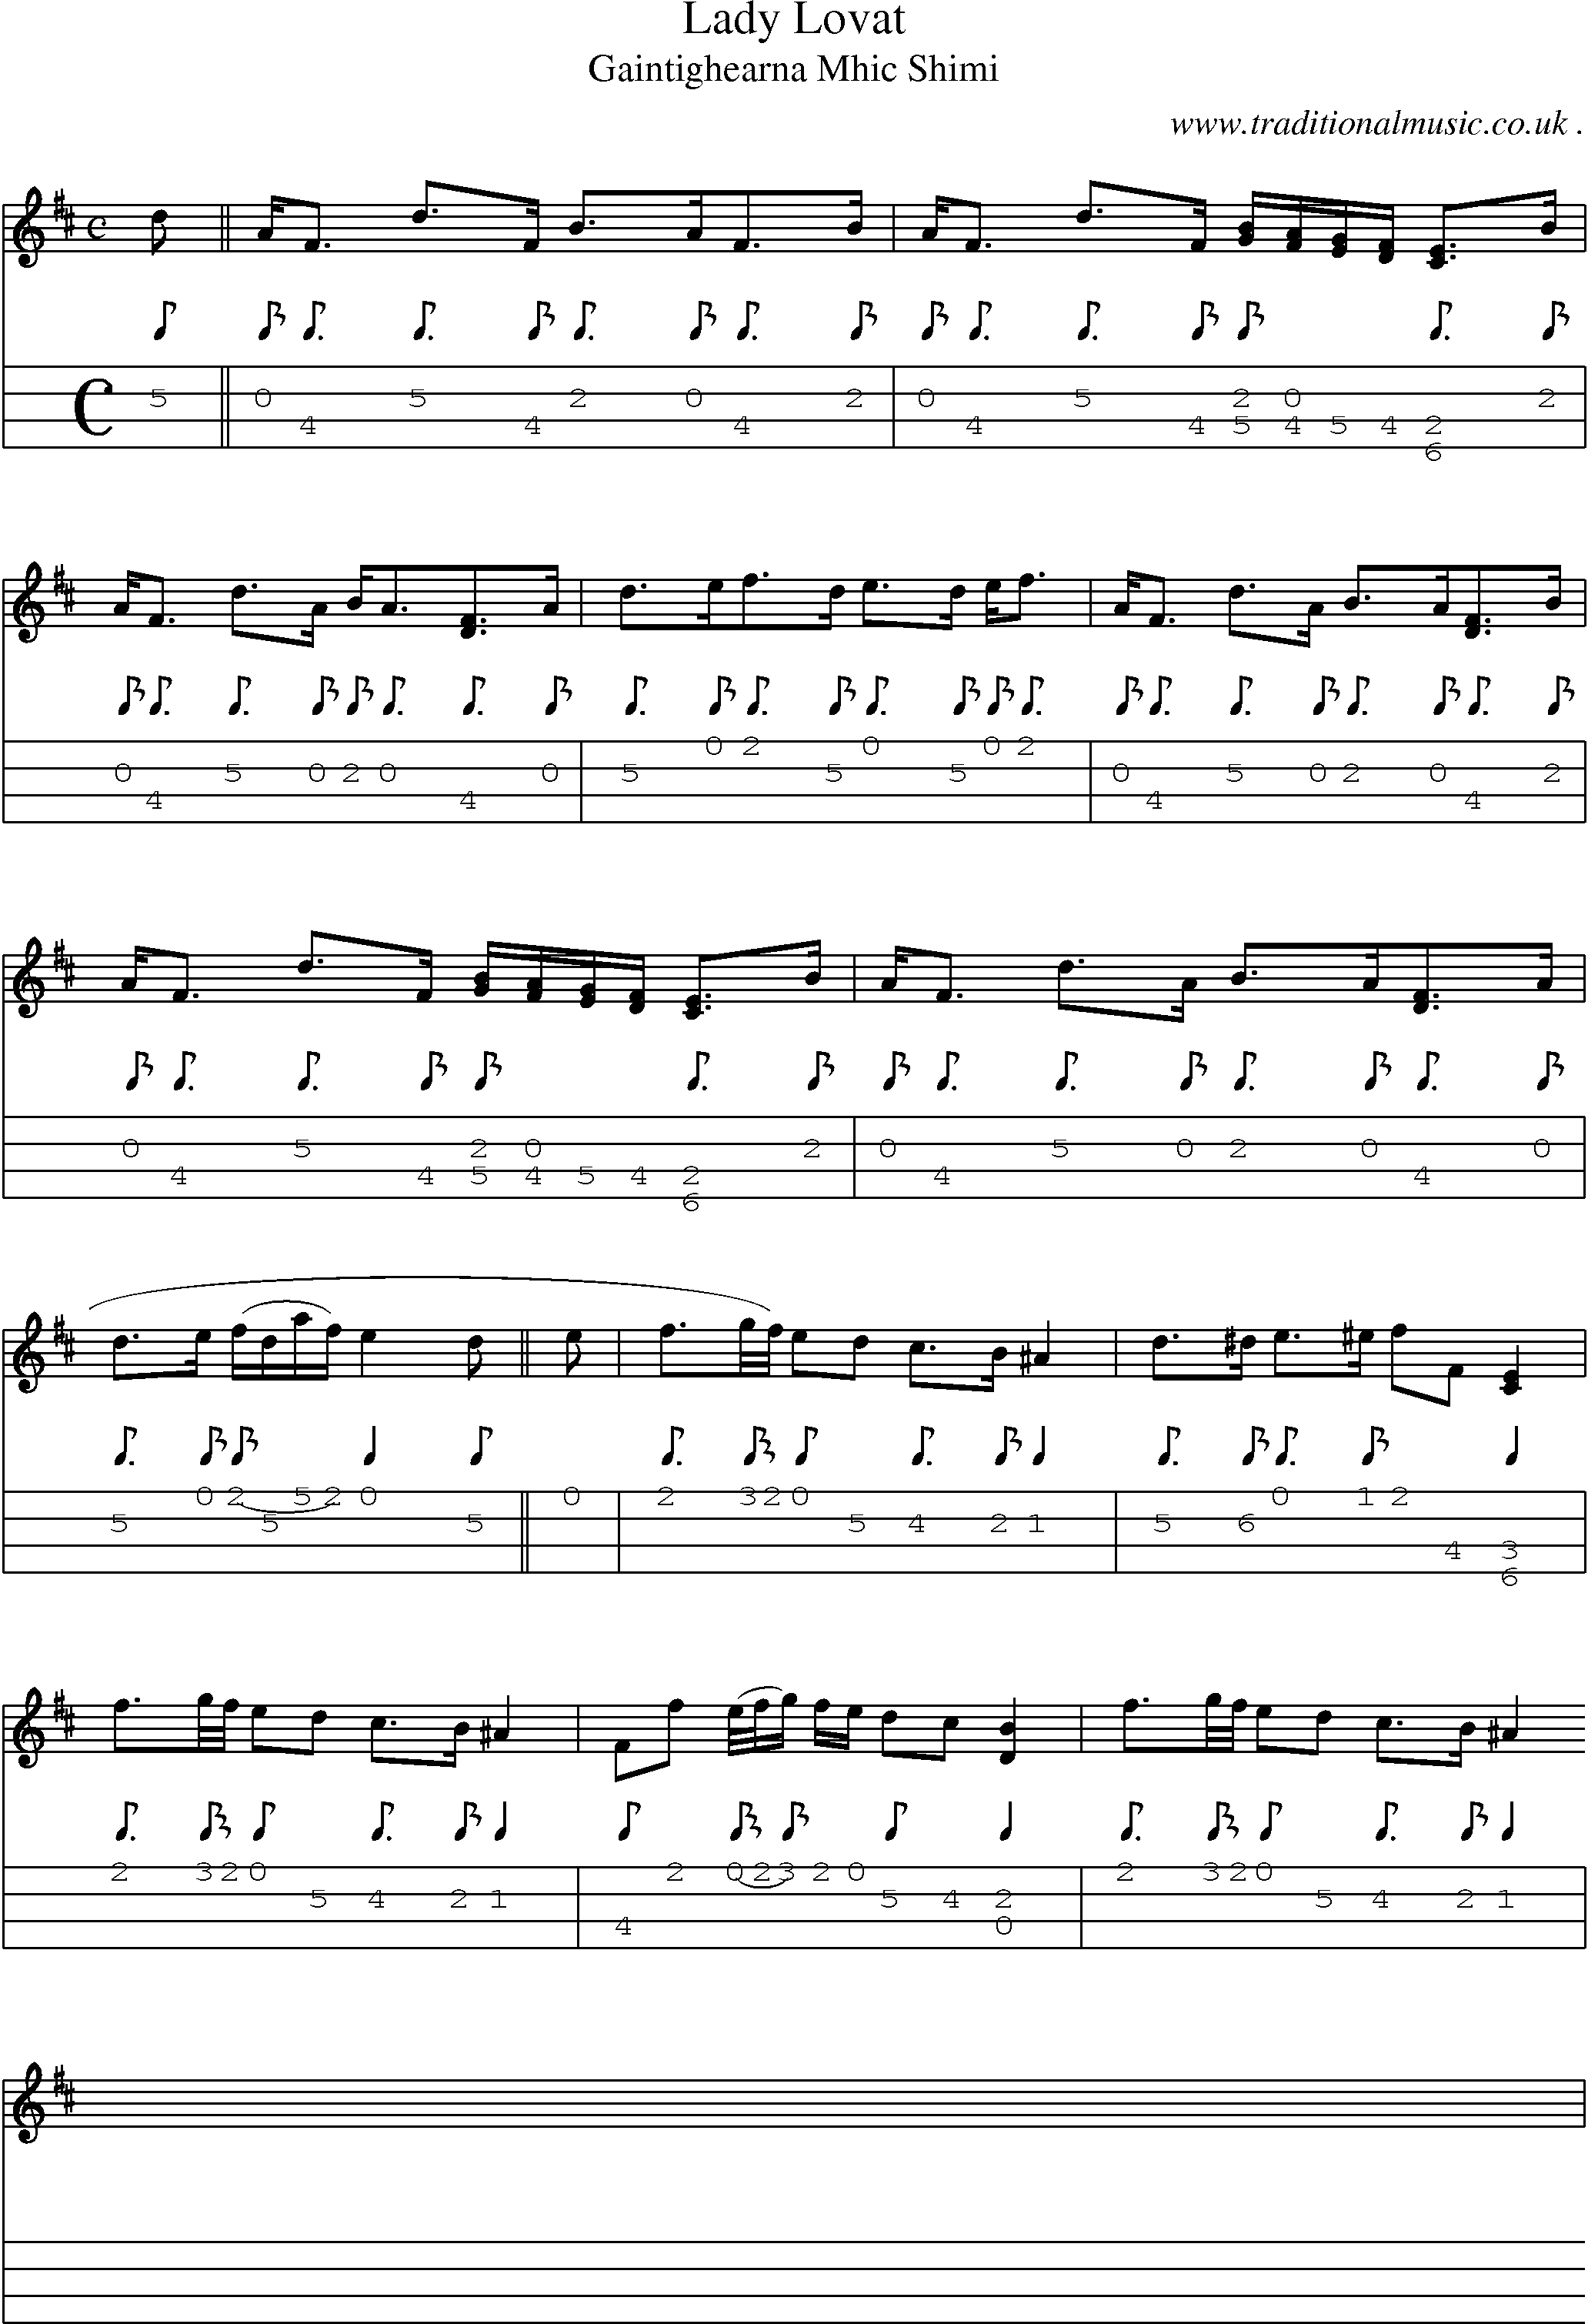 Sheet-music  score, Chords and Mandolin Tabs for Lady Lovat